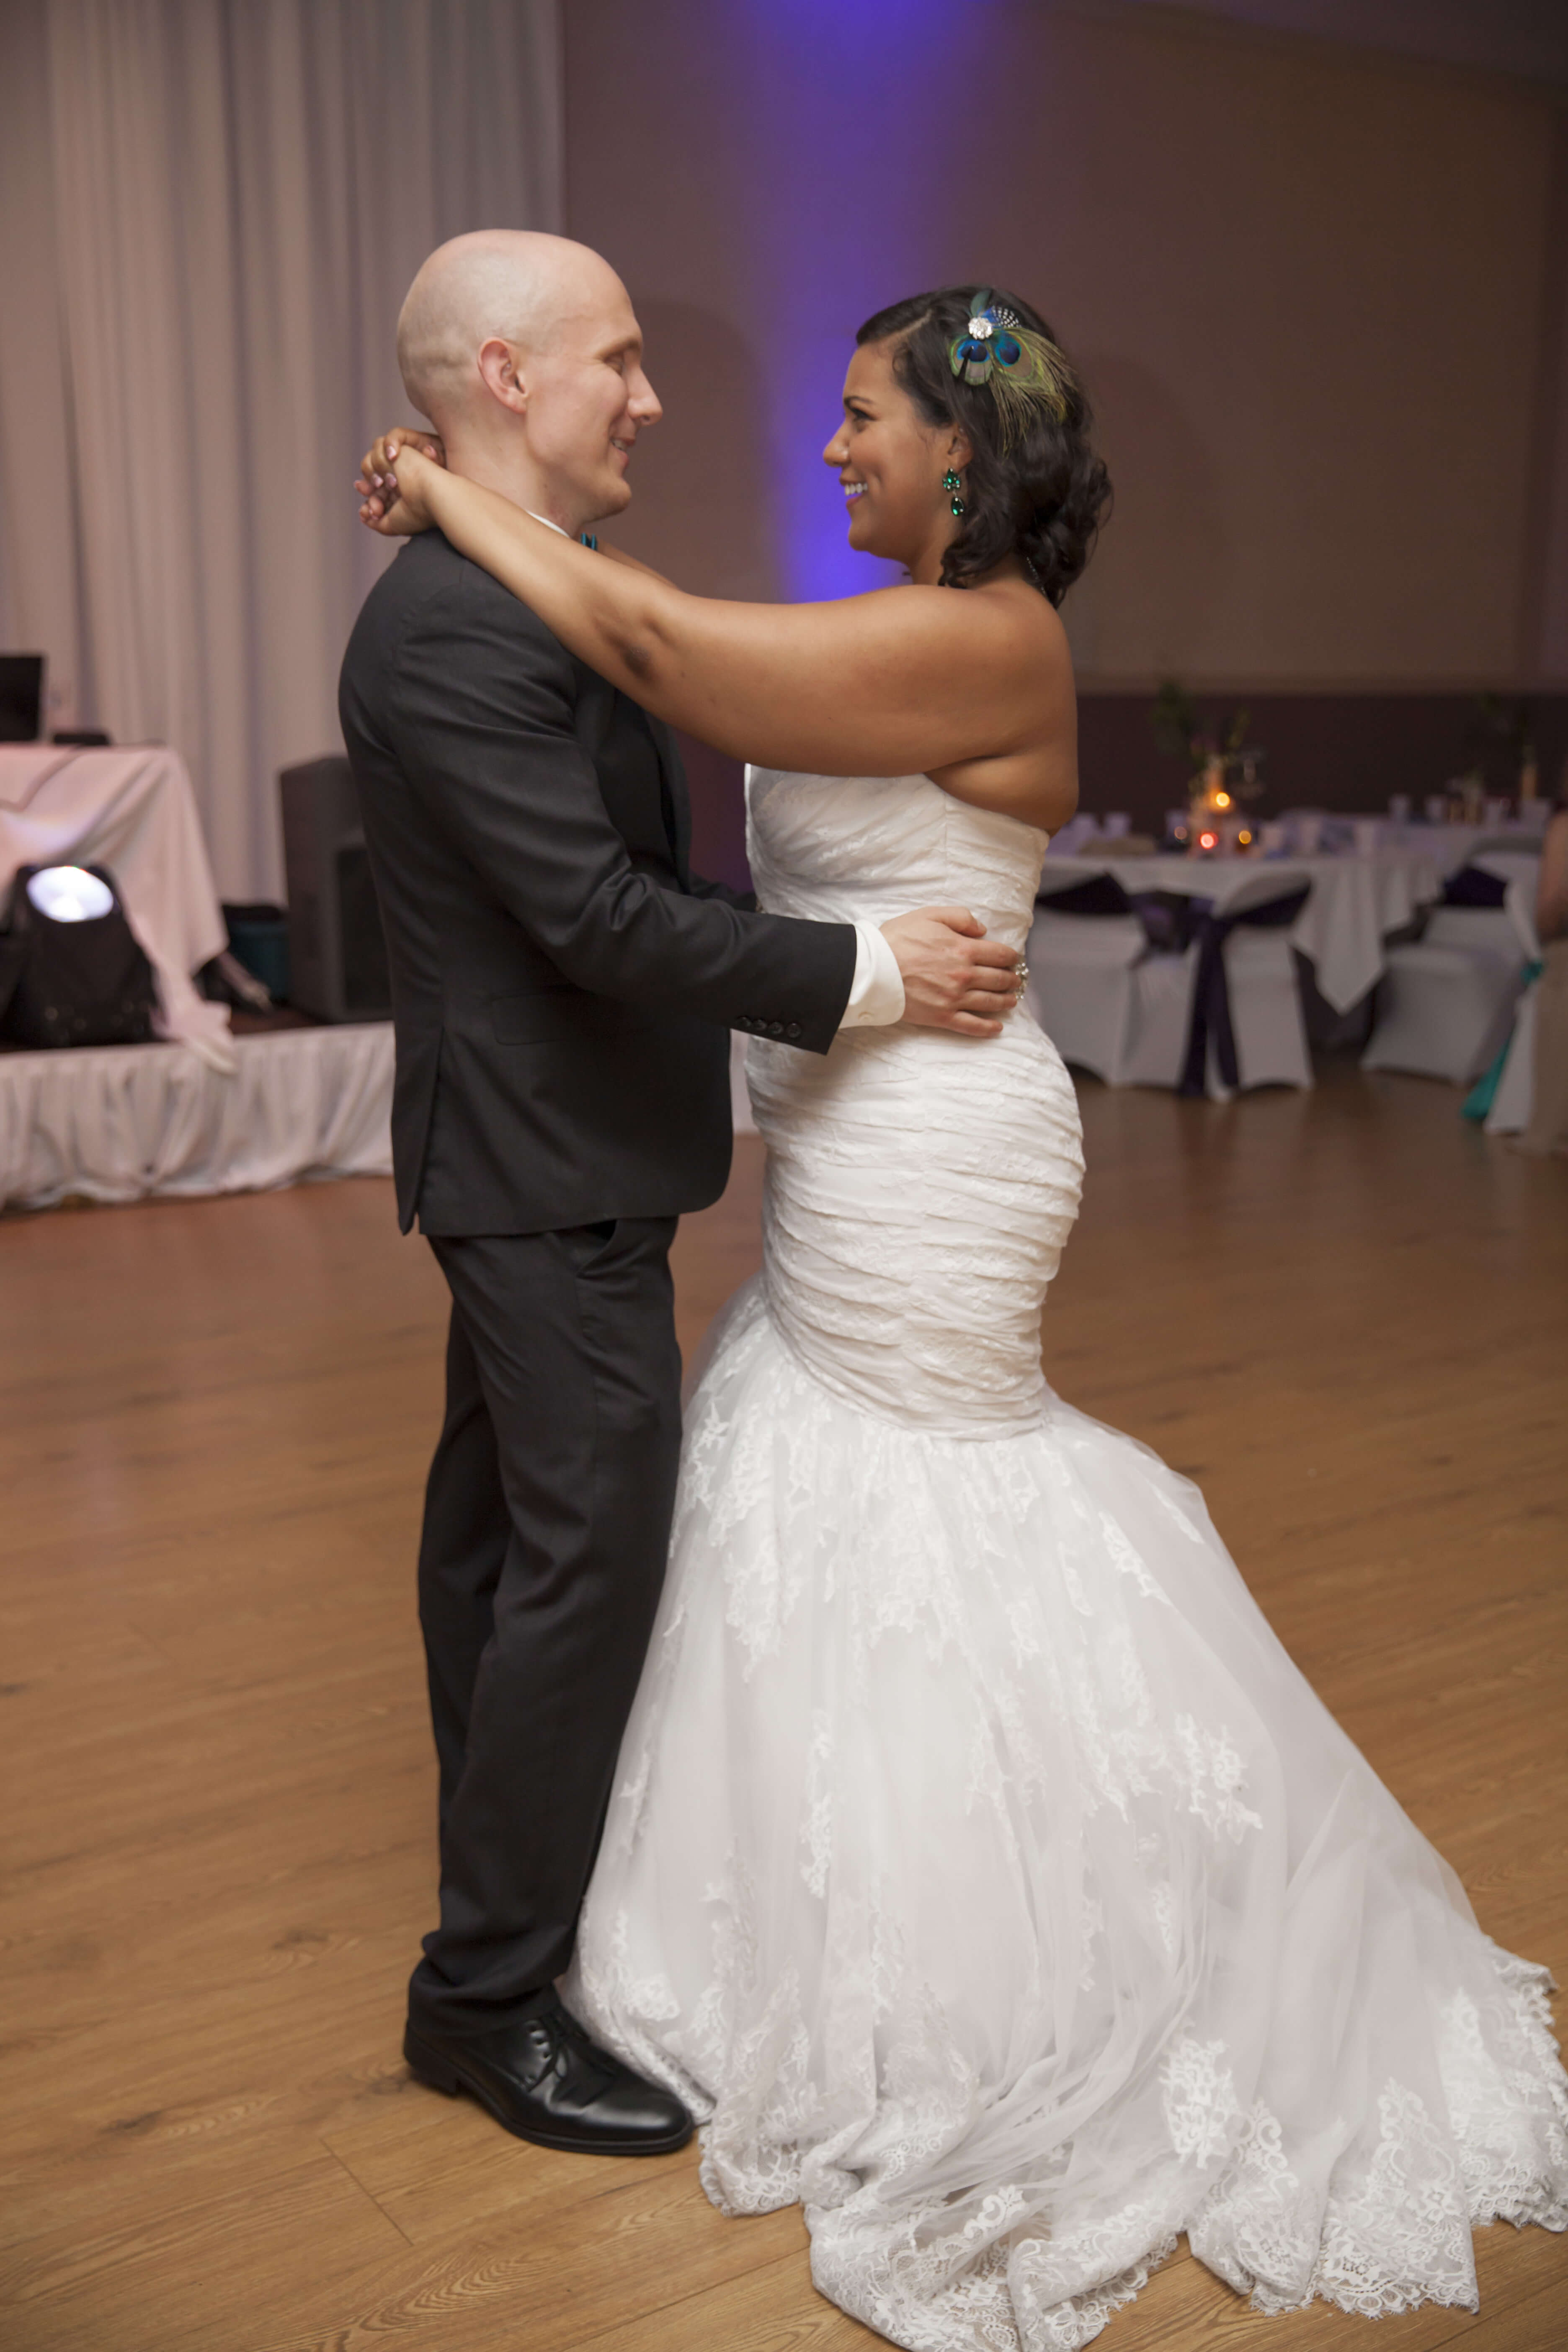 the bride and groom's first dance